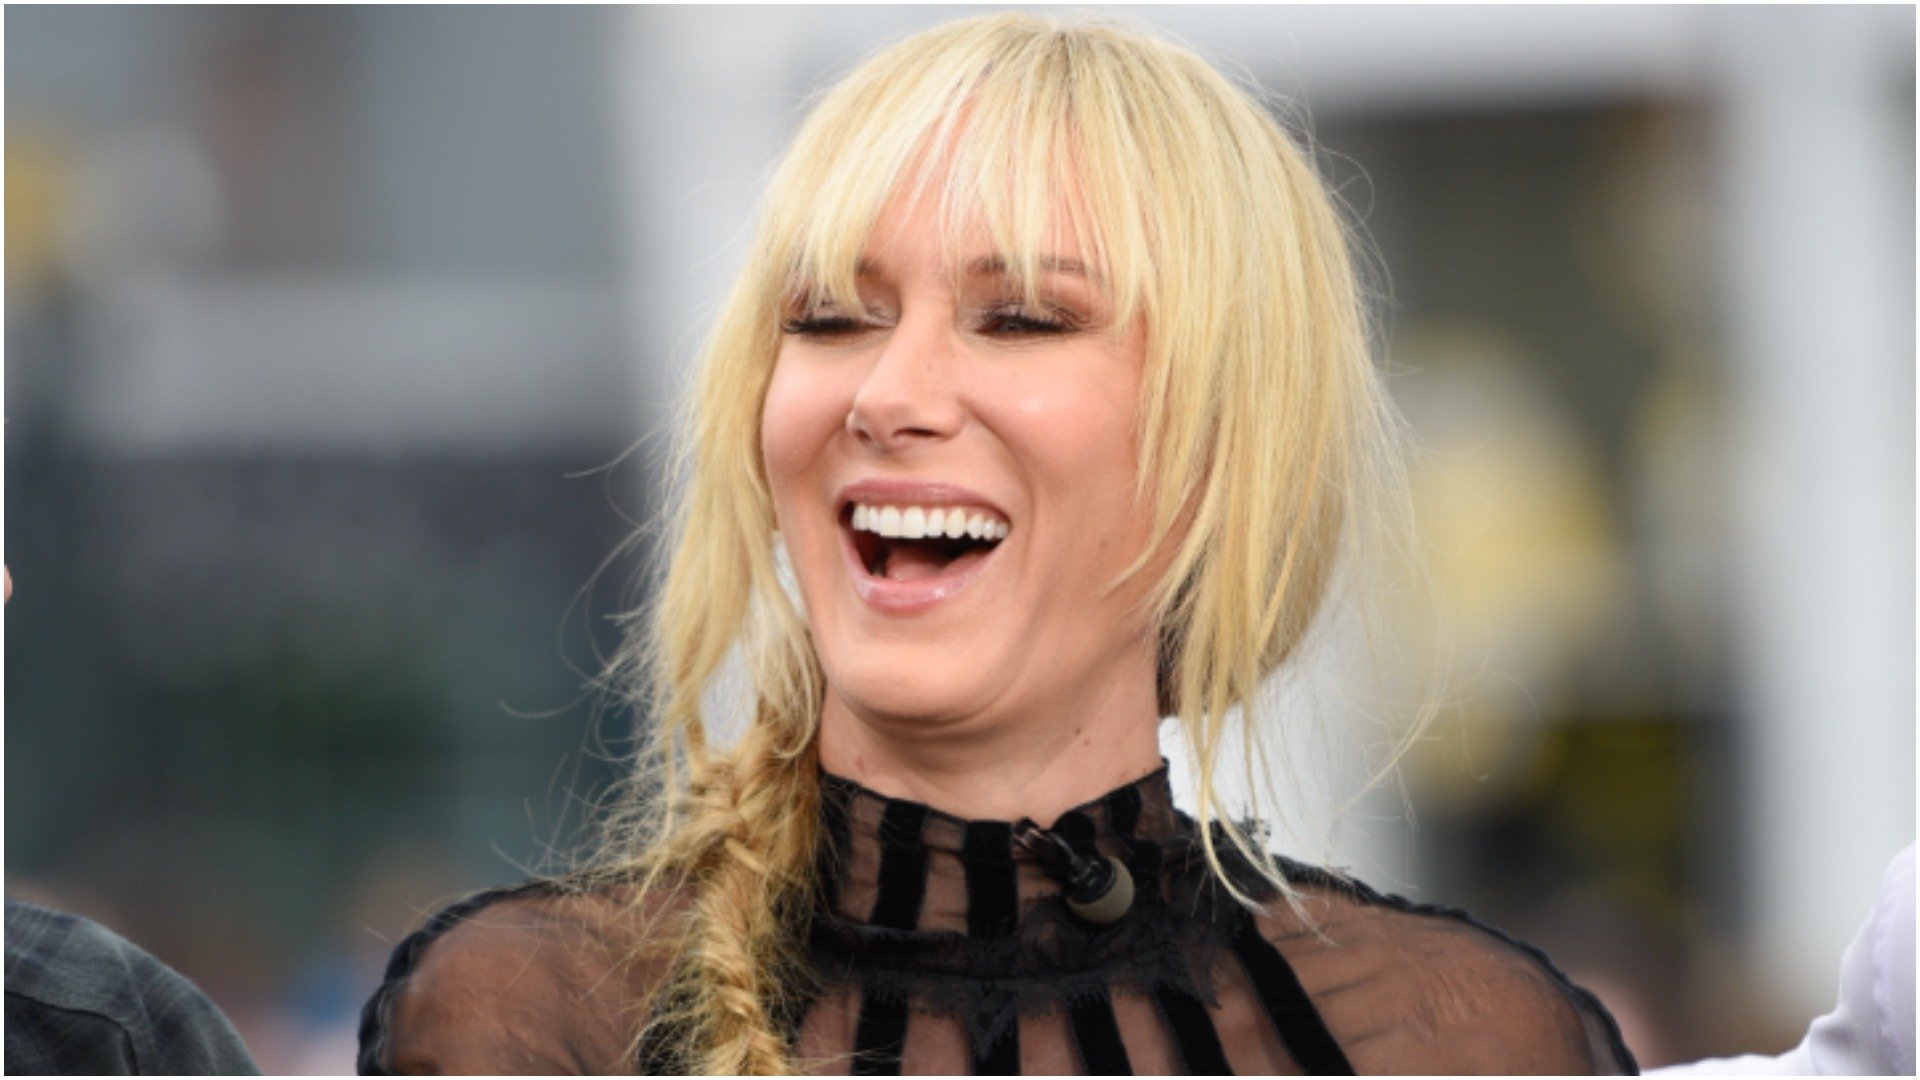 Kimberly Stewart is Rock Royalty - Palm Beach Illustrated